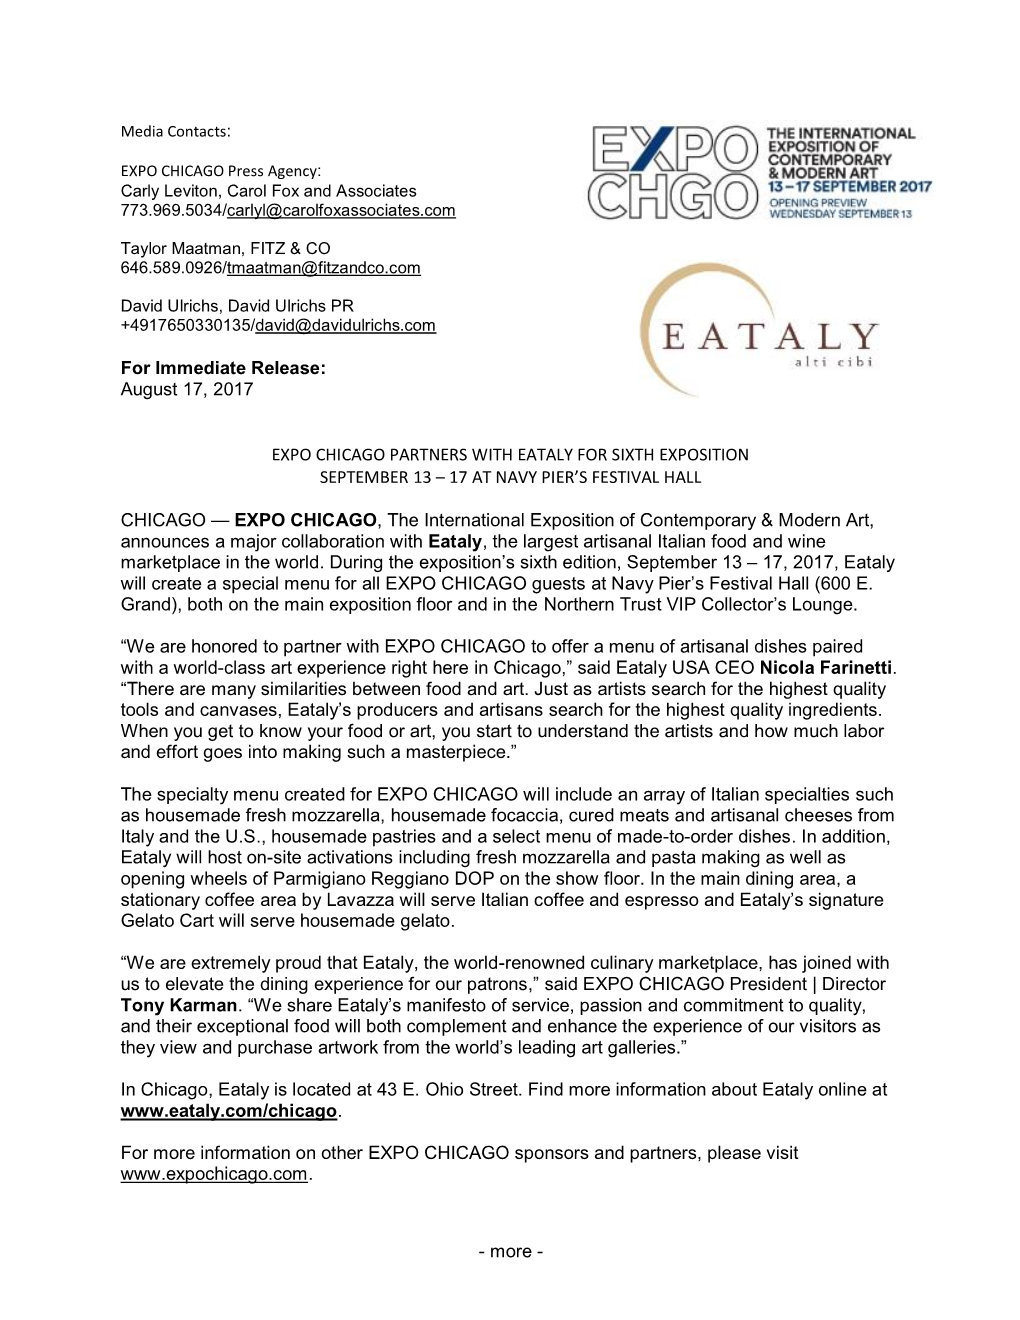 August 17, 2017 EXPO CHICAGO PARTNERS with EATALY FOR